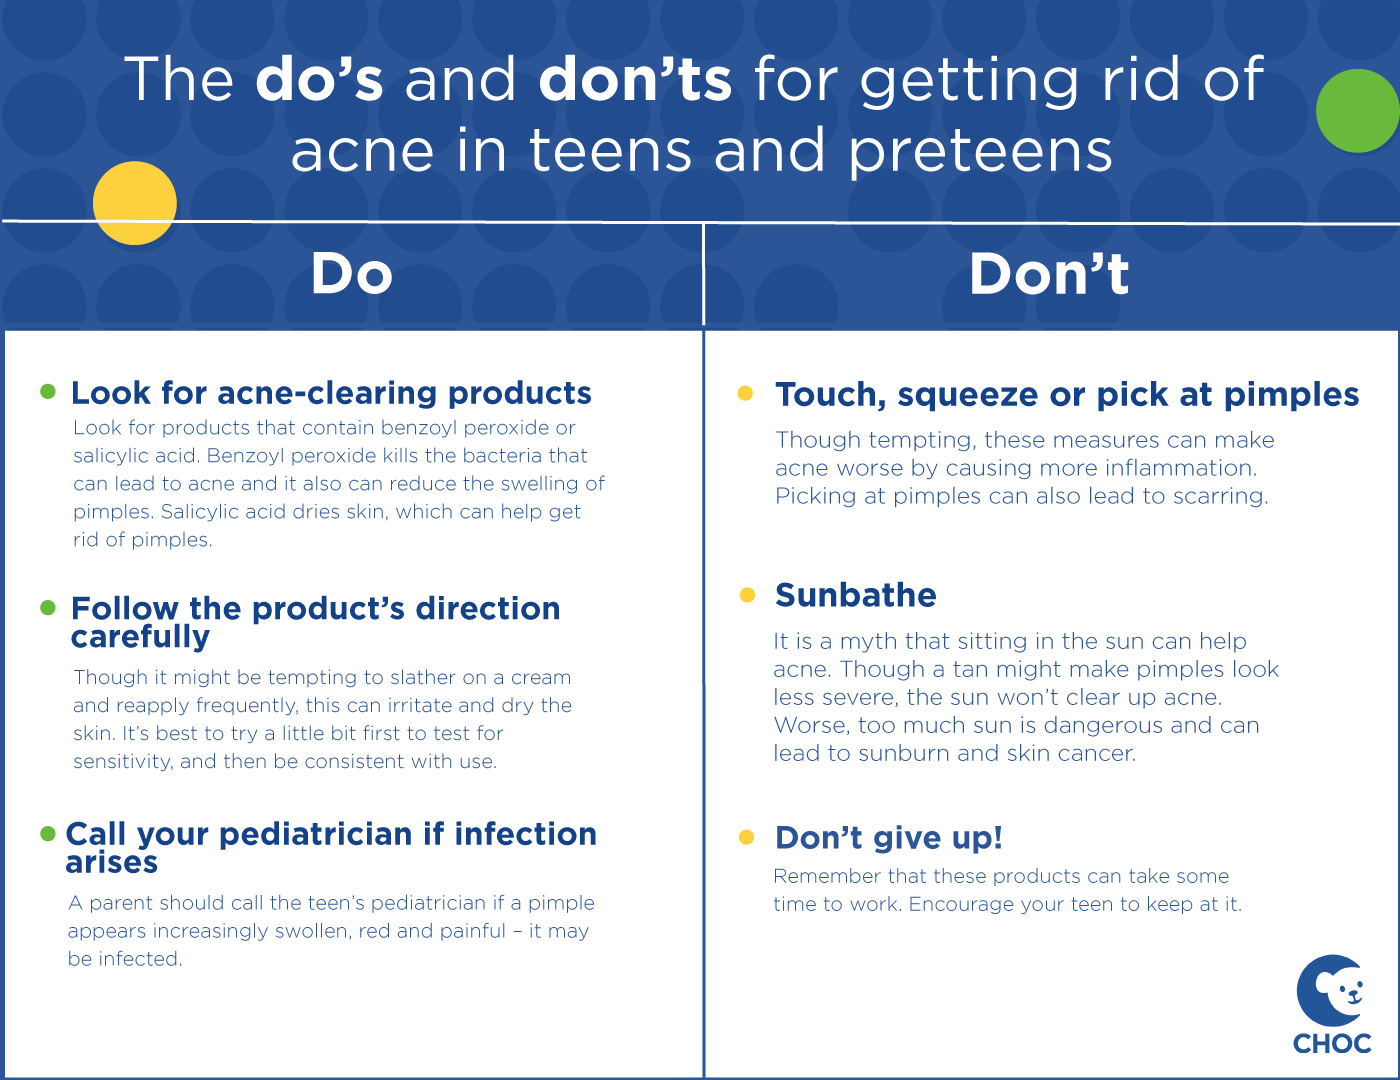 Chart describes the do's and don't for preventing and treating acne